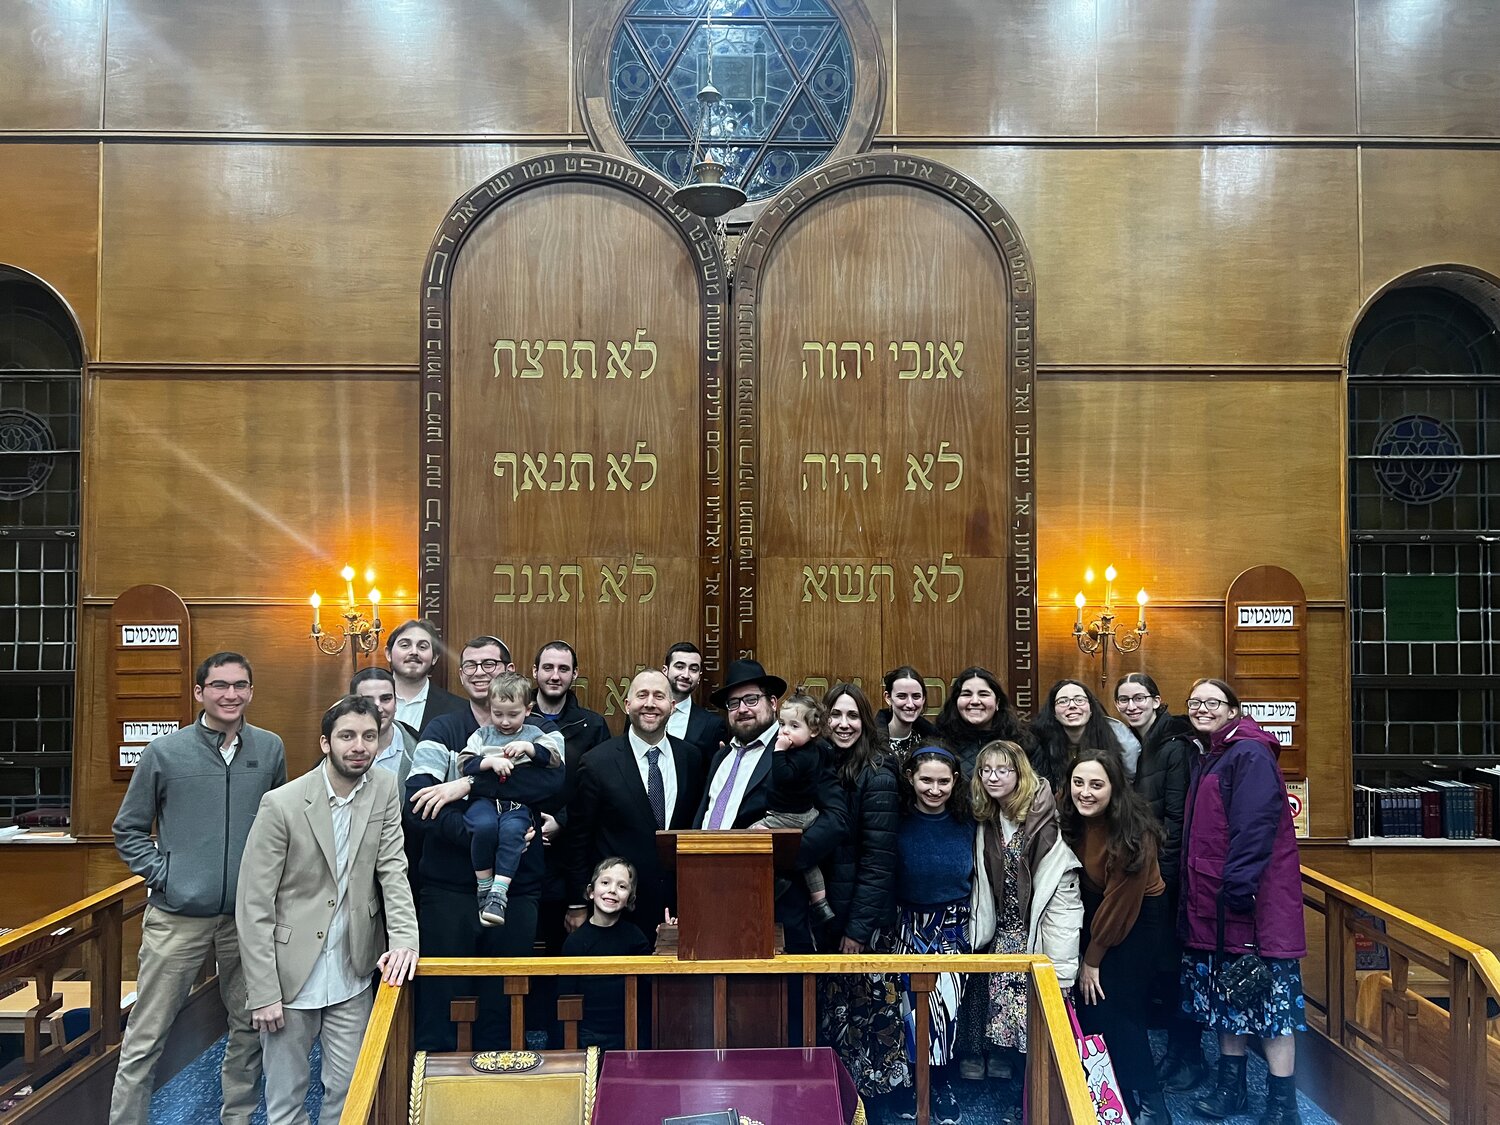 Just over 20 students from Queens were the first to participate in the BACH Jewish Center’s partnership with the Jewish Learning Initiative on Campus.